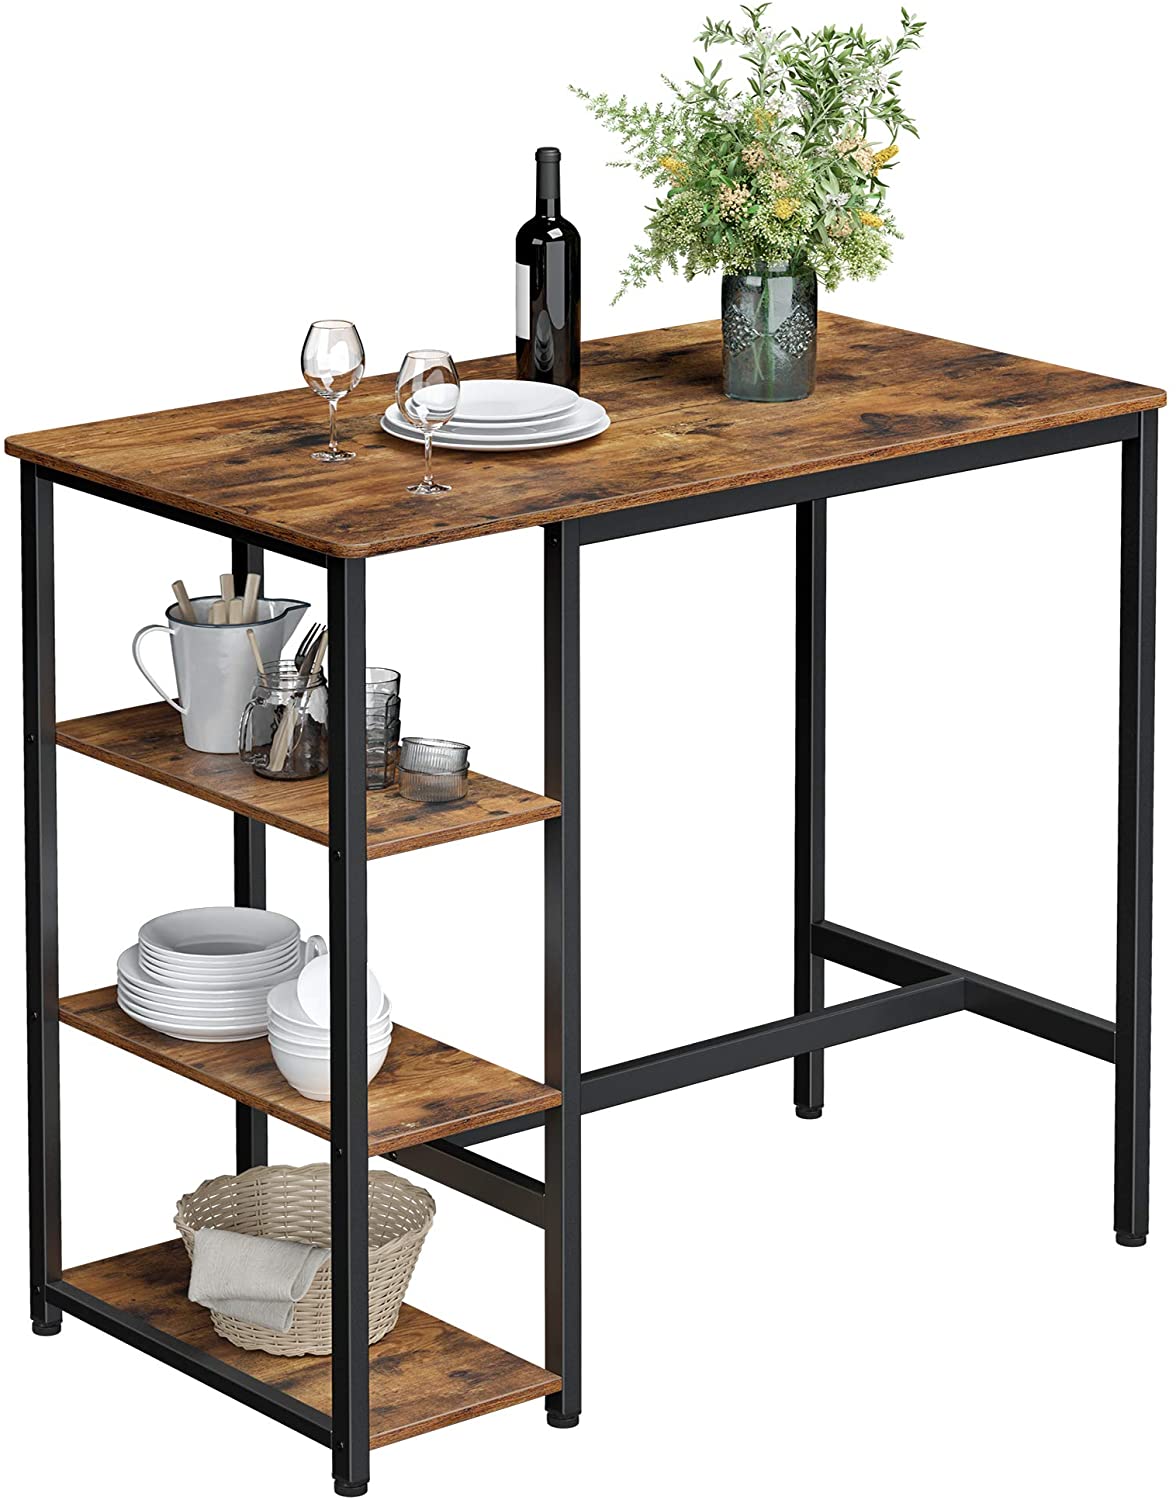 Dining Table with 3 Shelves and Industrial Style Stable Steel Structure,  109 x 60 x 100 cm, Rustic Brown